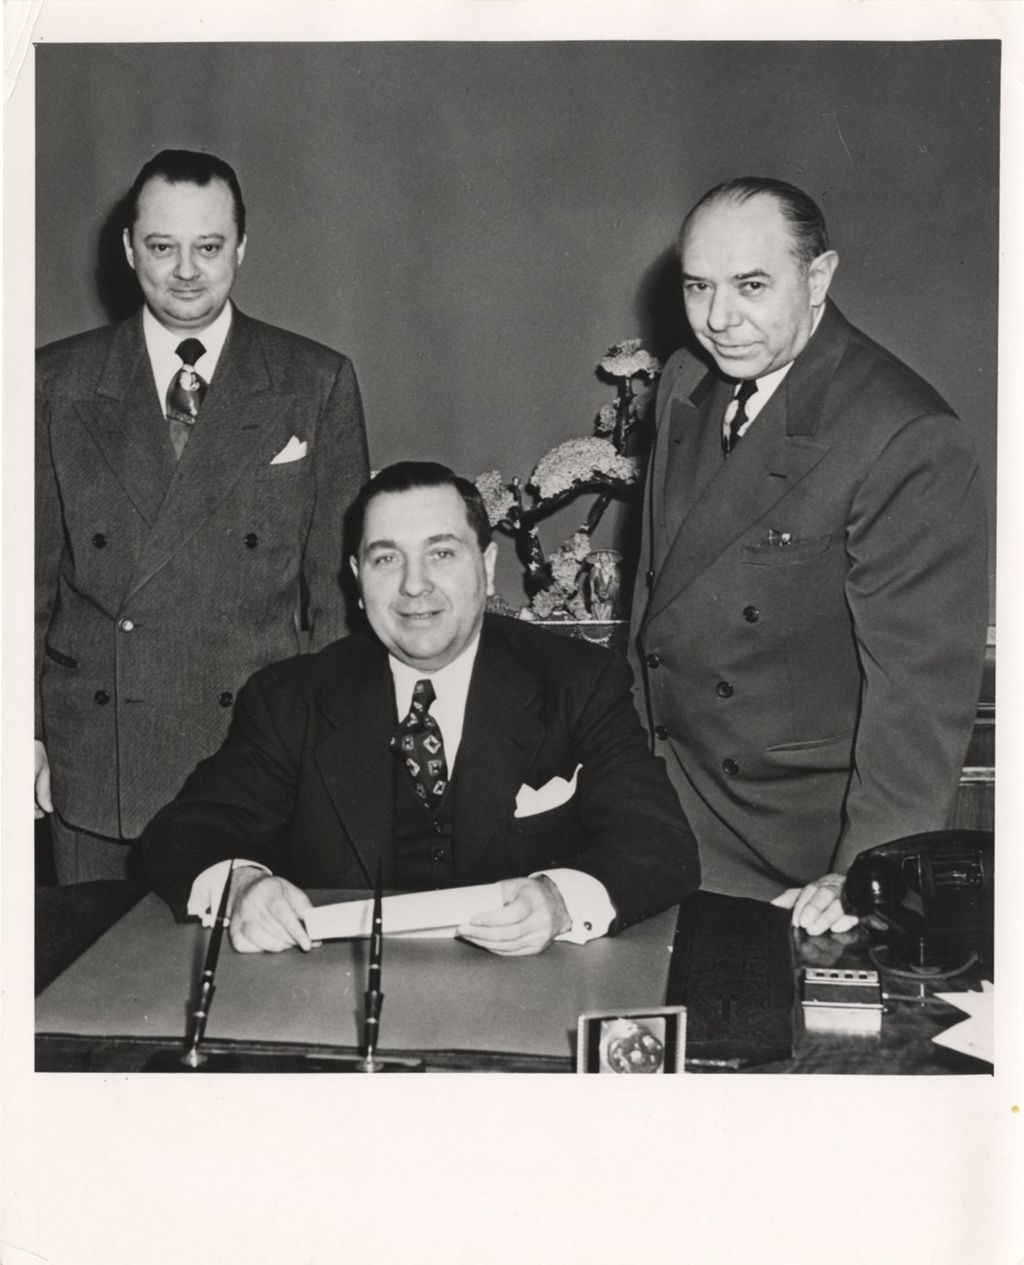 Richard J. Daley at his desk with two men